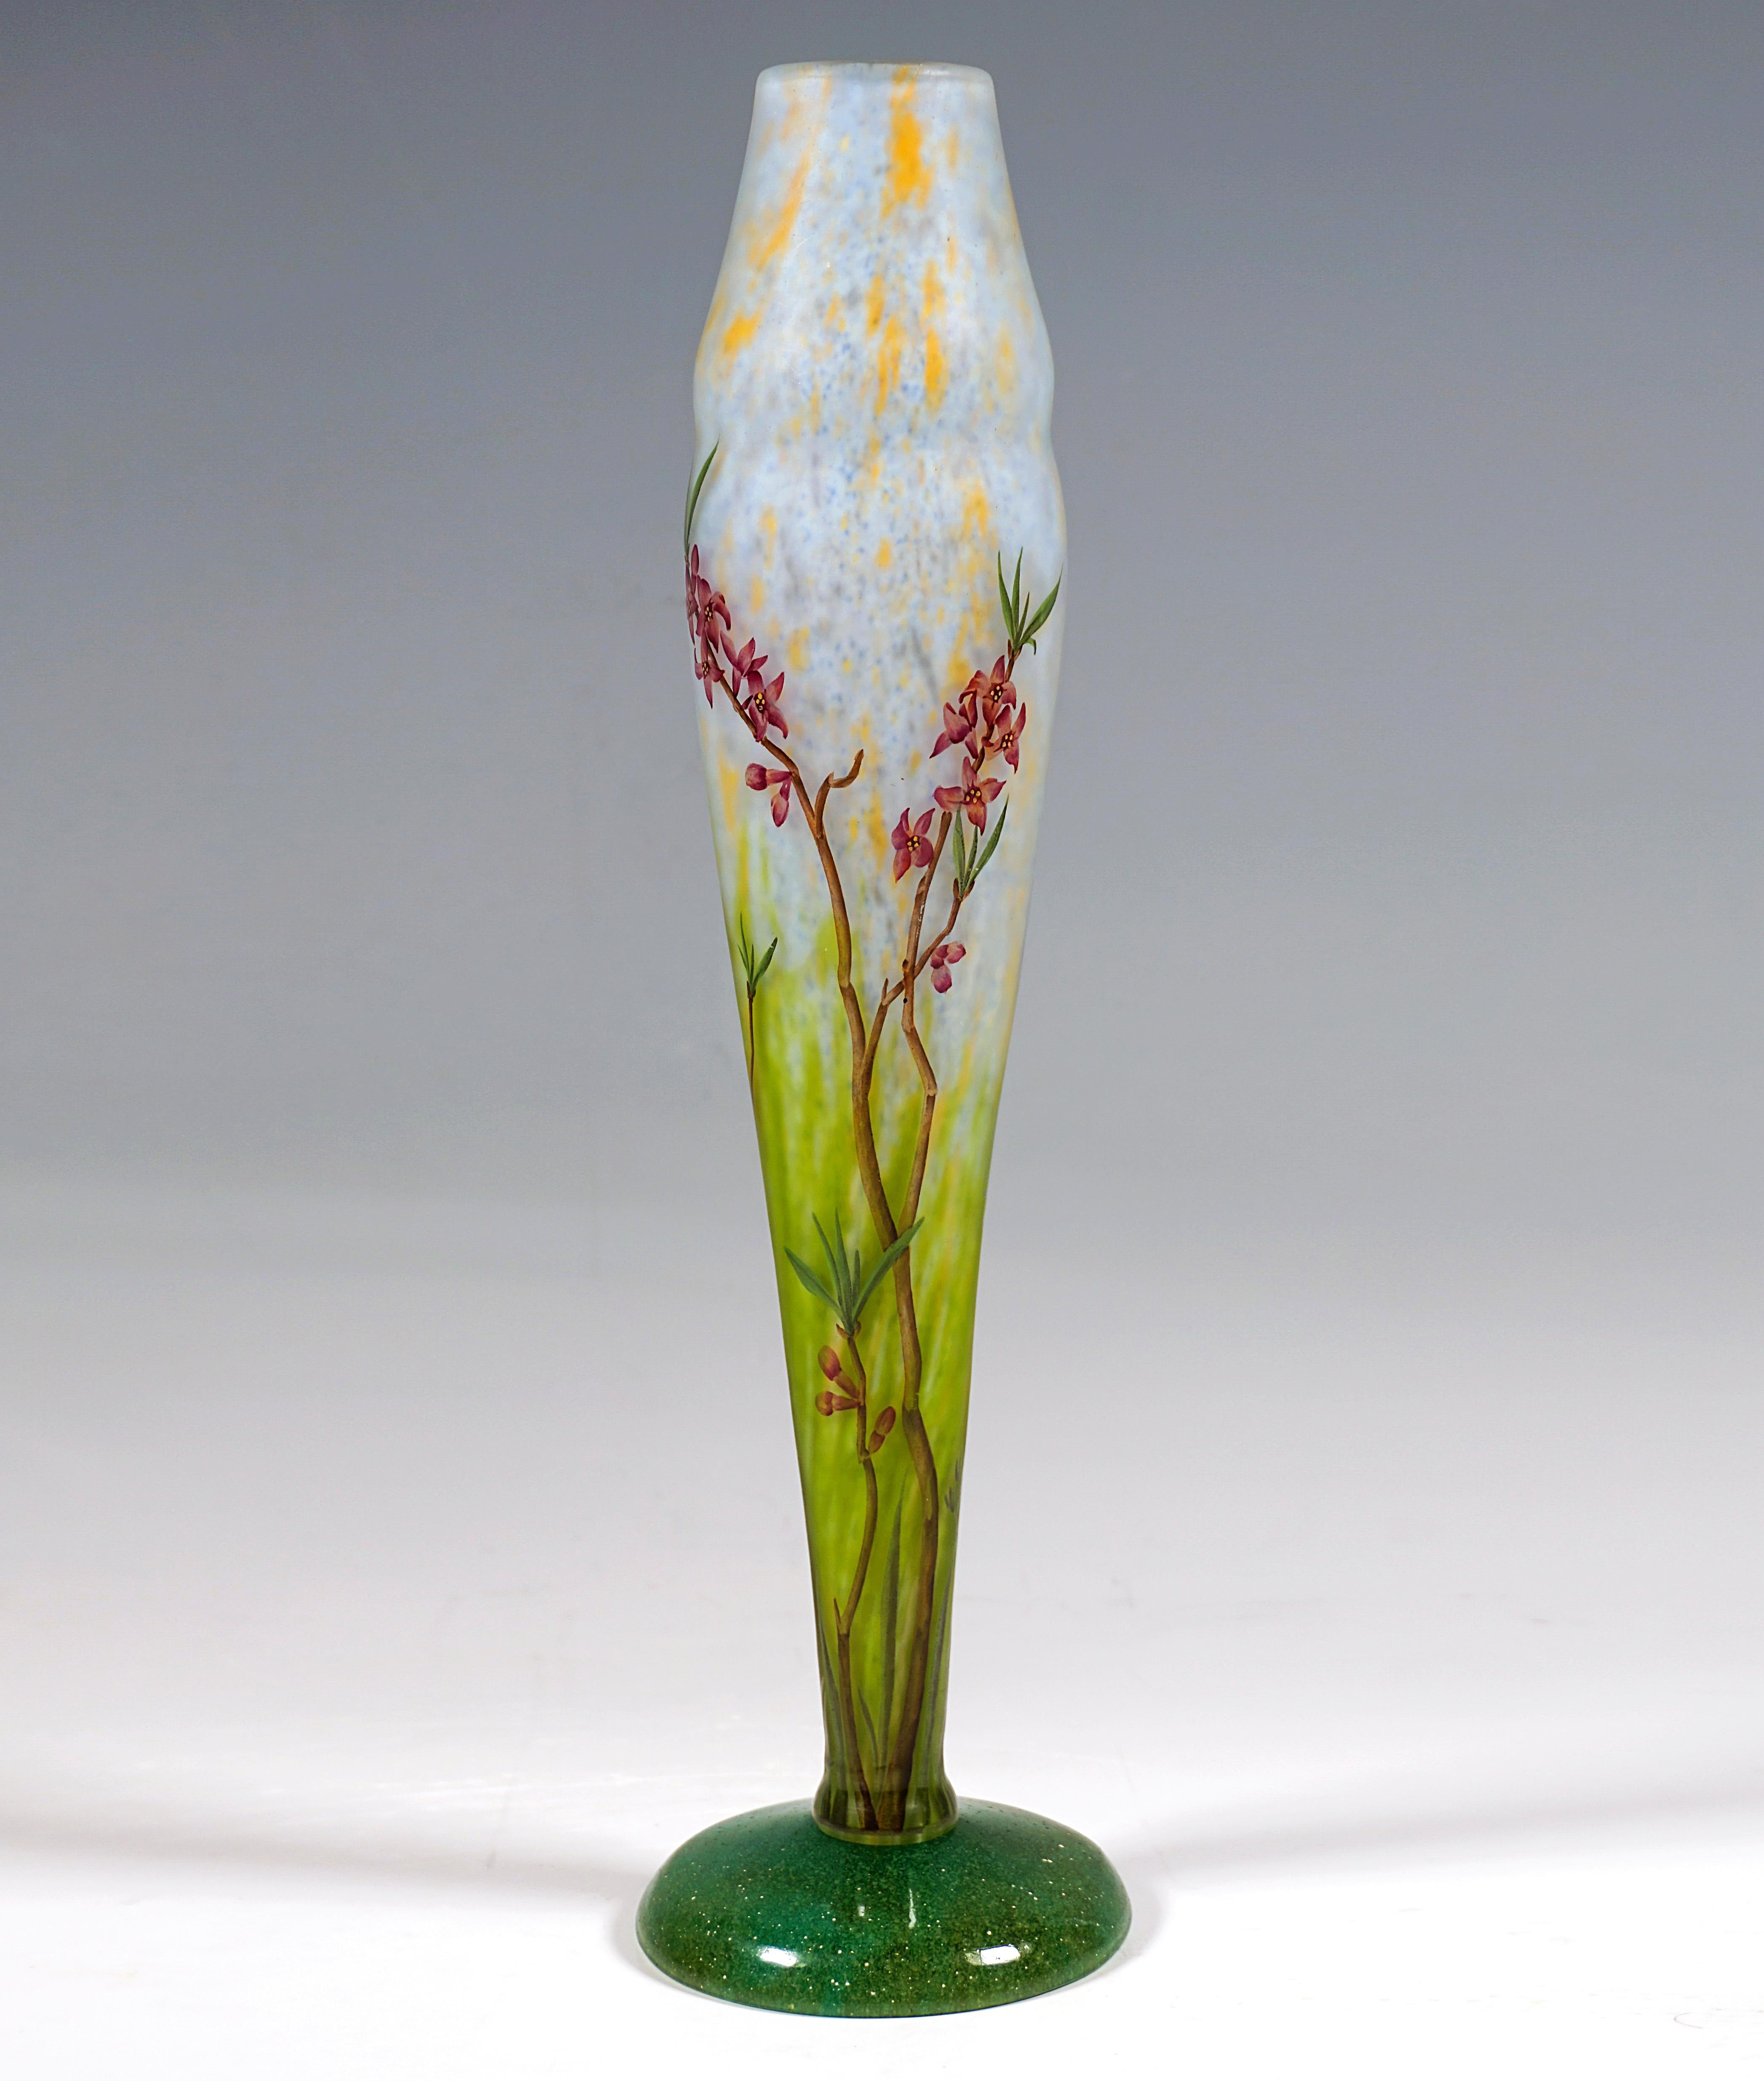 Slender baluster vase, colorless glass with white and yellow, in the lower area with meadow green powder inclusions, arched, flush base with green-turquoise color inclusions, as well as air bubbles, vase body with satin finish, delicate flowering